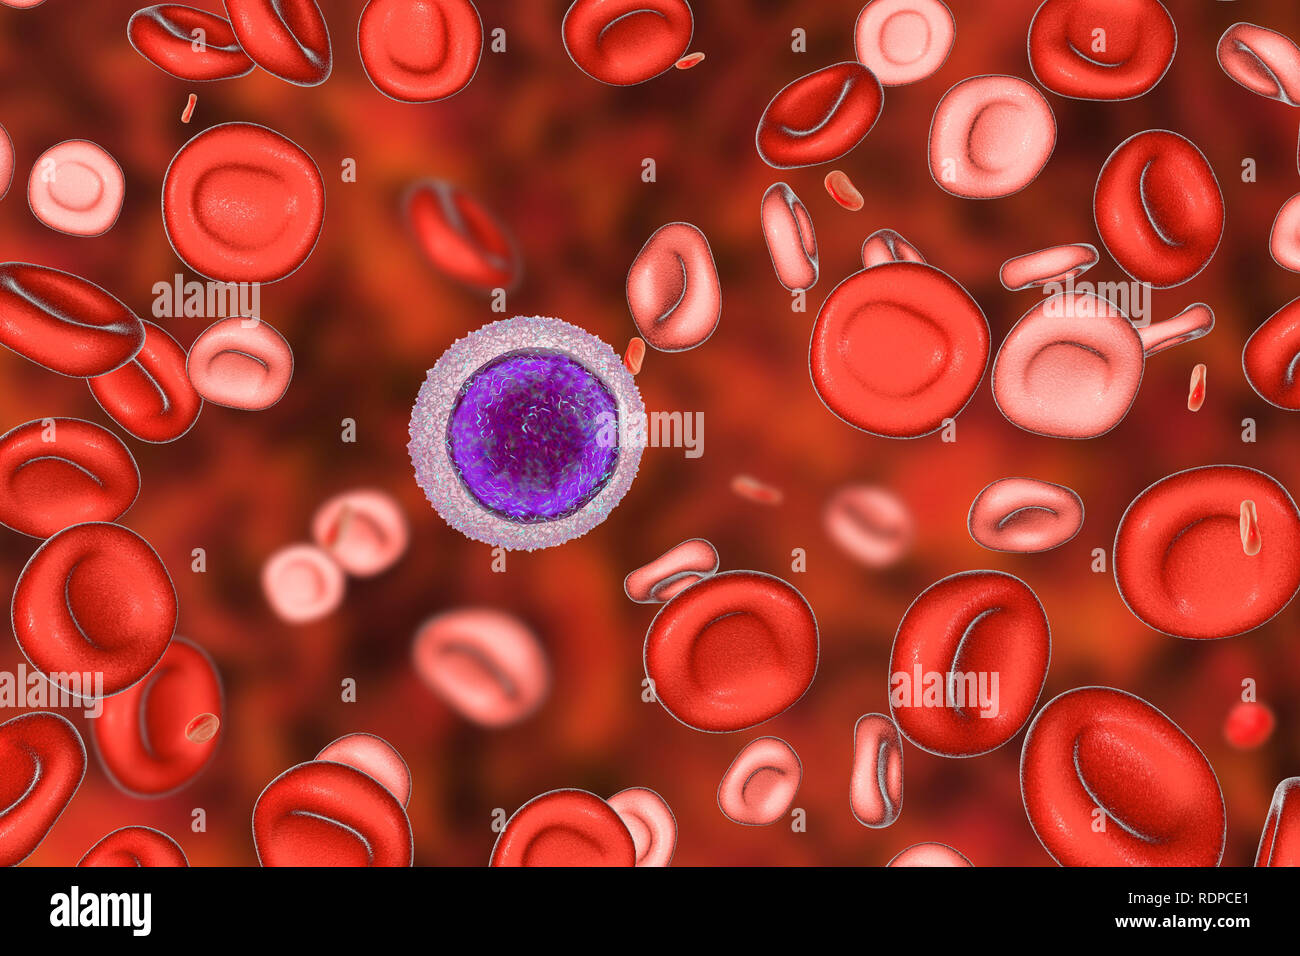 Hypochromic Red Blood Cell Captions Swap